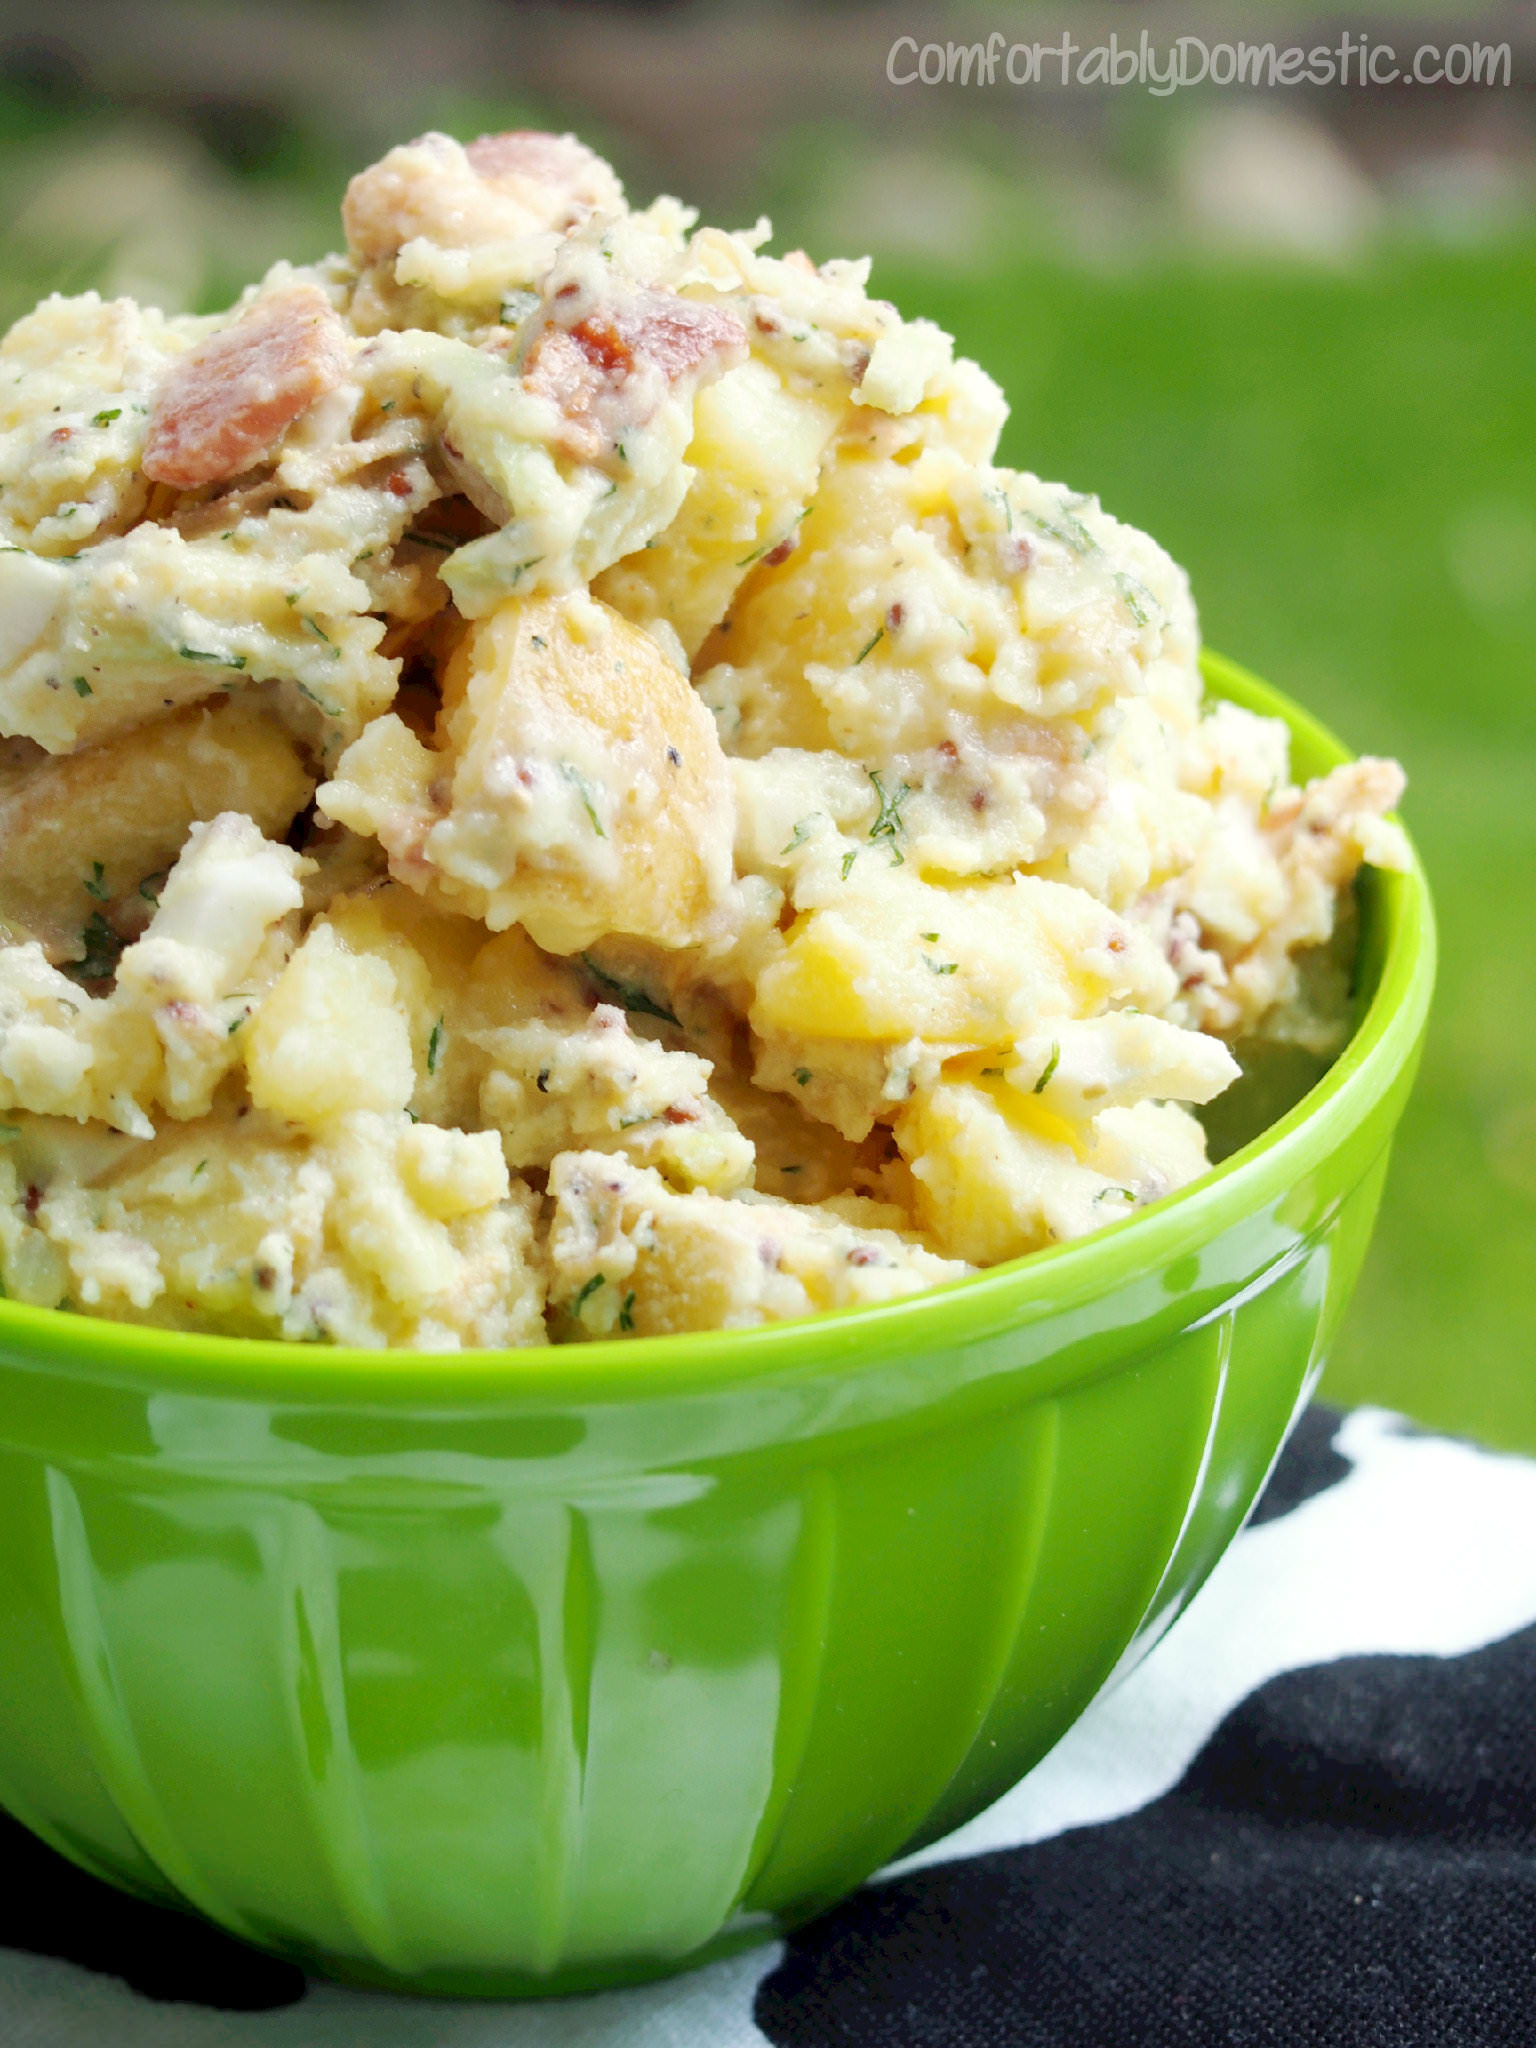 Creamy yellow potatoes are the base for dill potato salad, a lightened up version of classic potato salad, made with bacon, eggs, and plenty of fresh dill. | ComfortablyDomestic.com